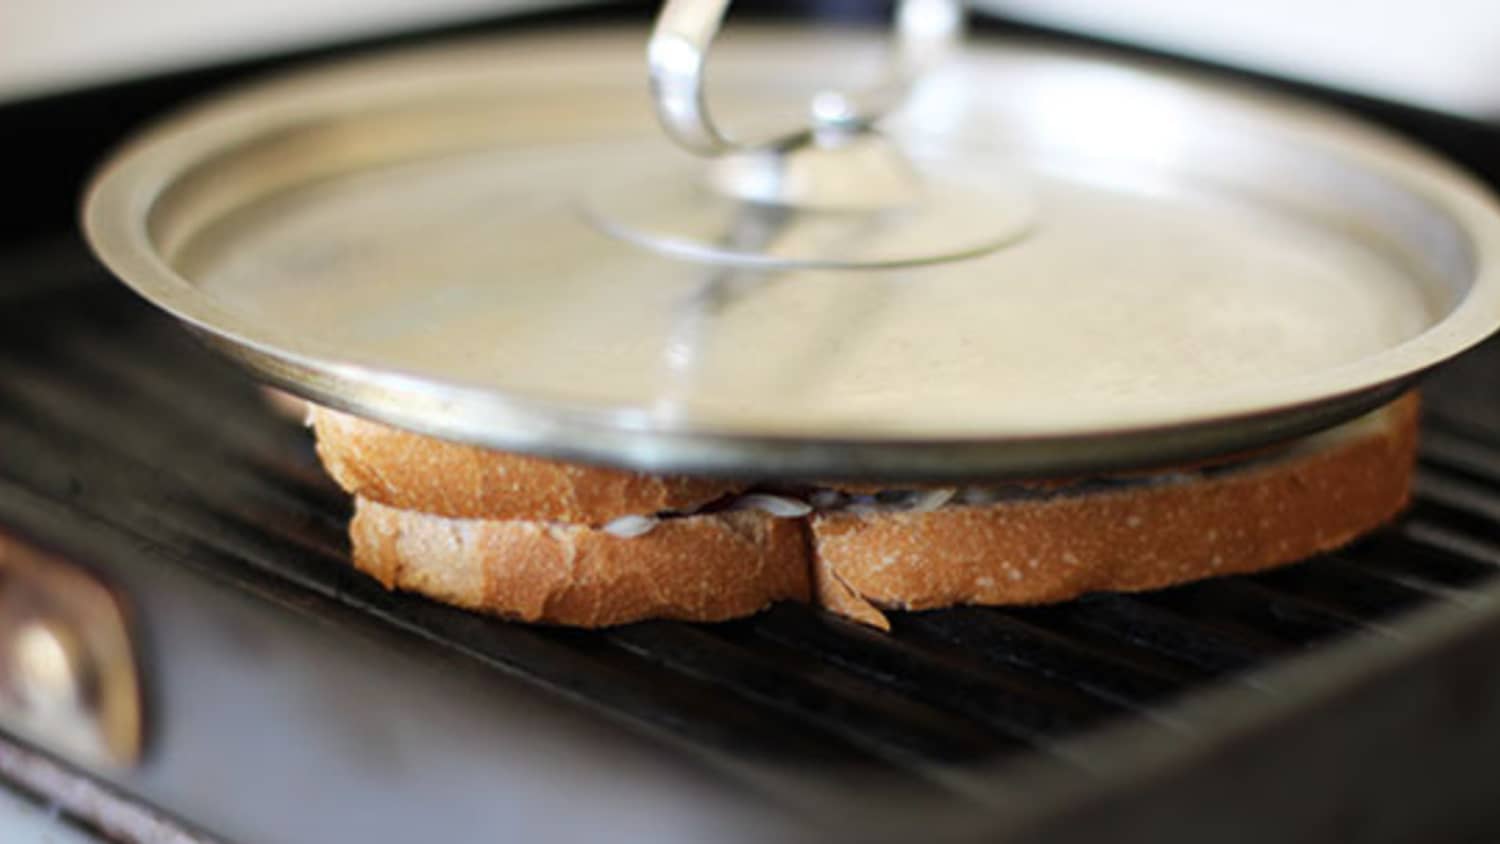 What can you cook in a sandwich press?